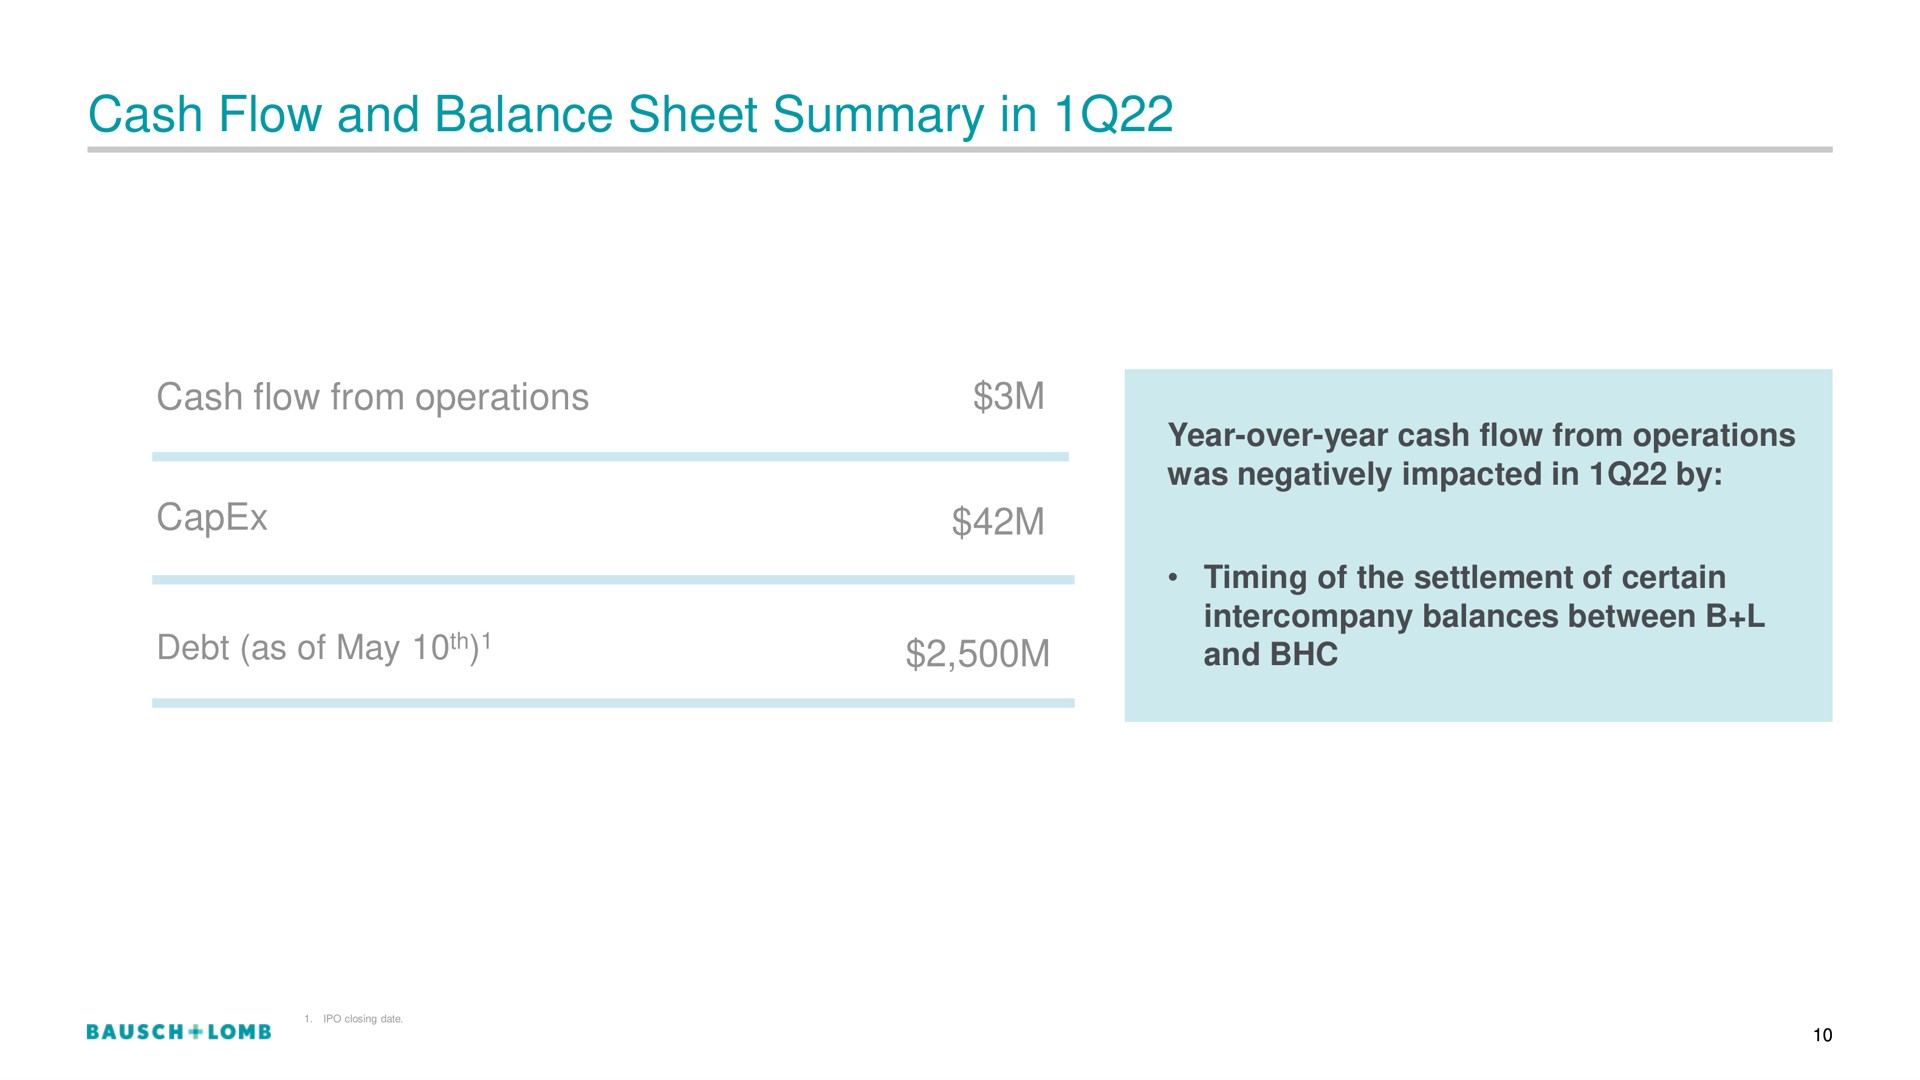 cash flow and balance sheet summary in | Bausch+Lomb